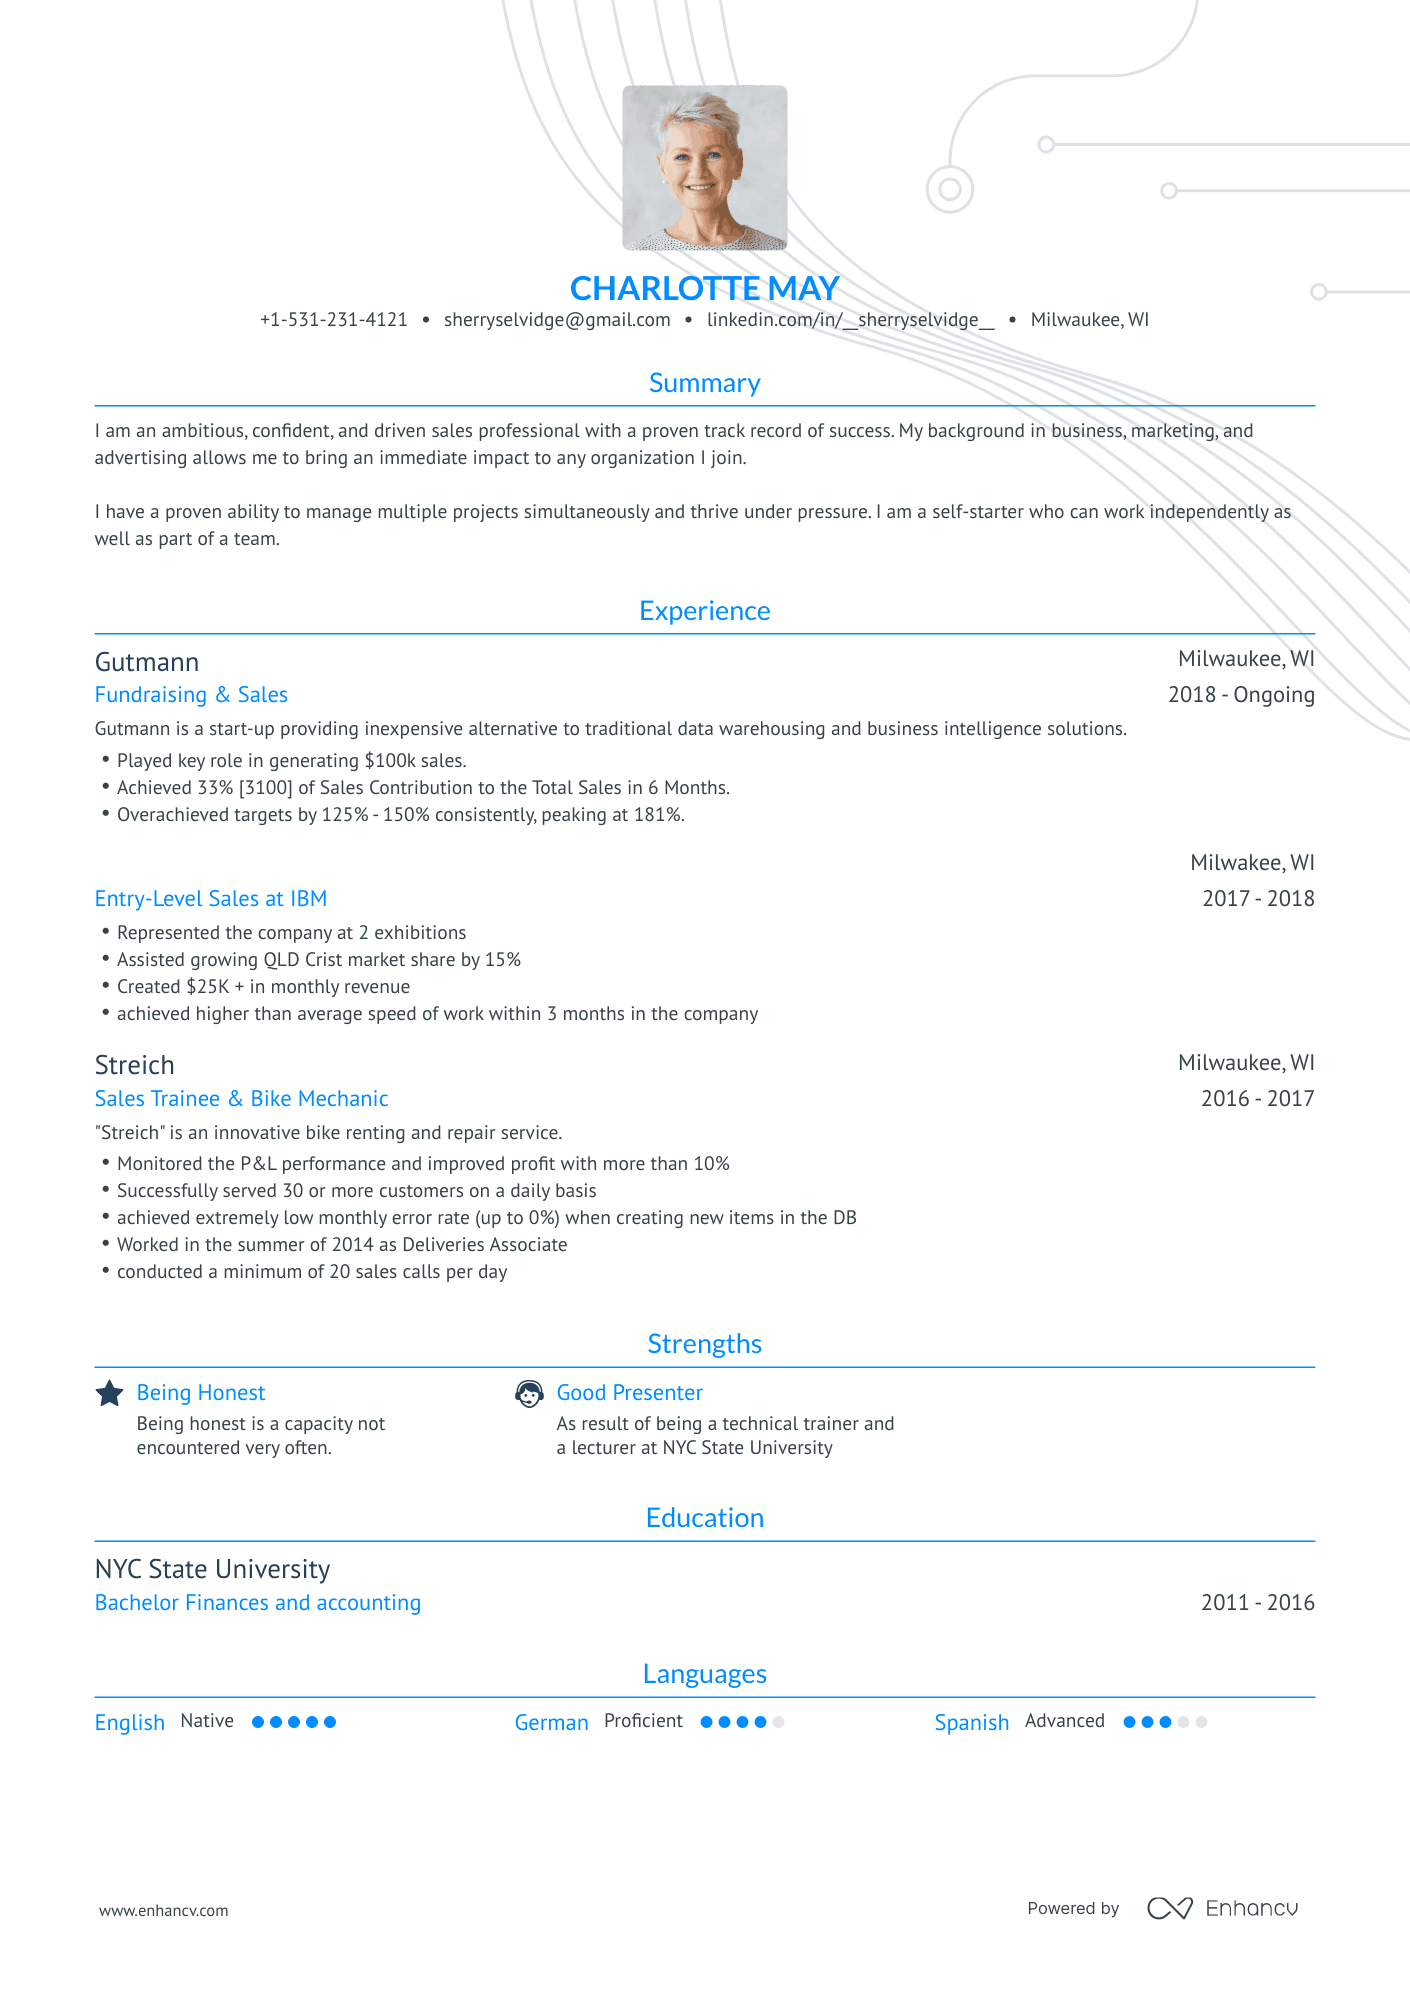 Traditional Entry Level Sales Resume Template